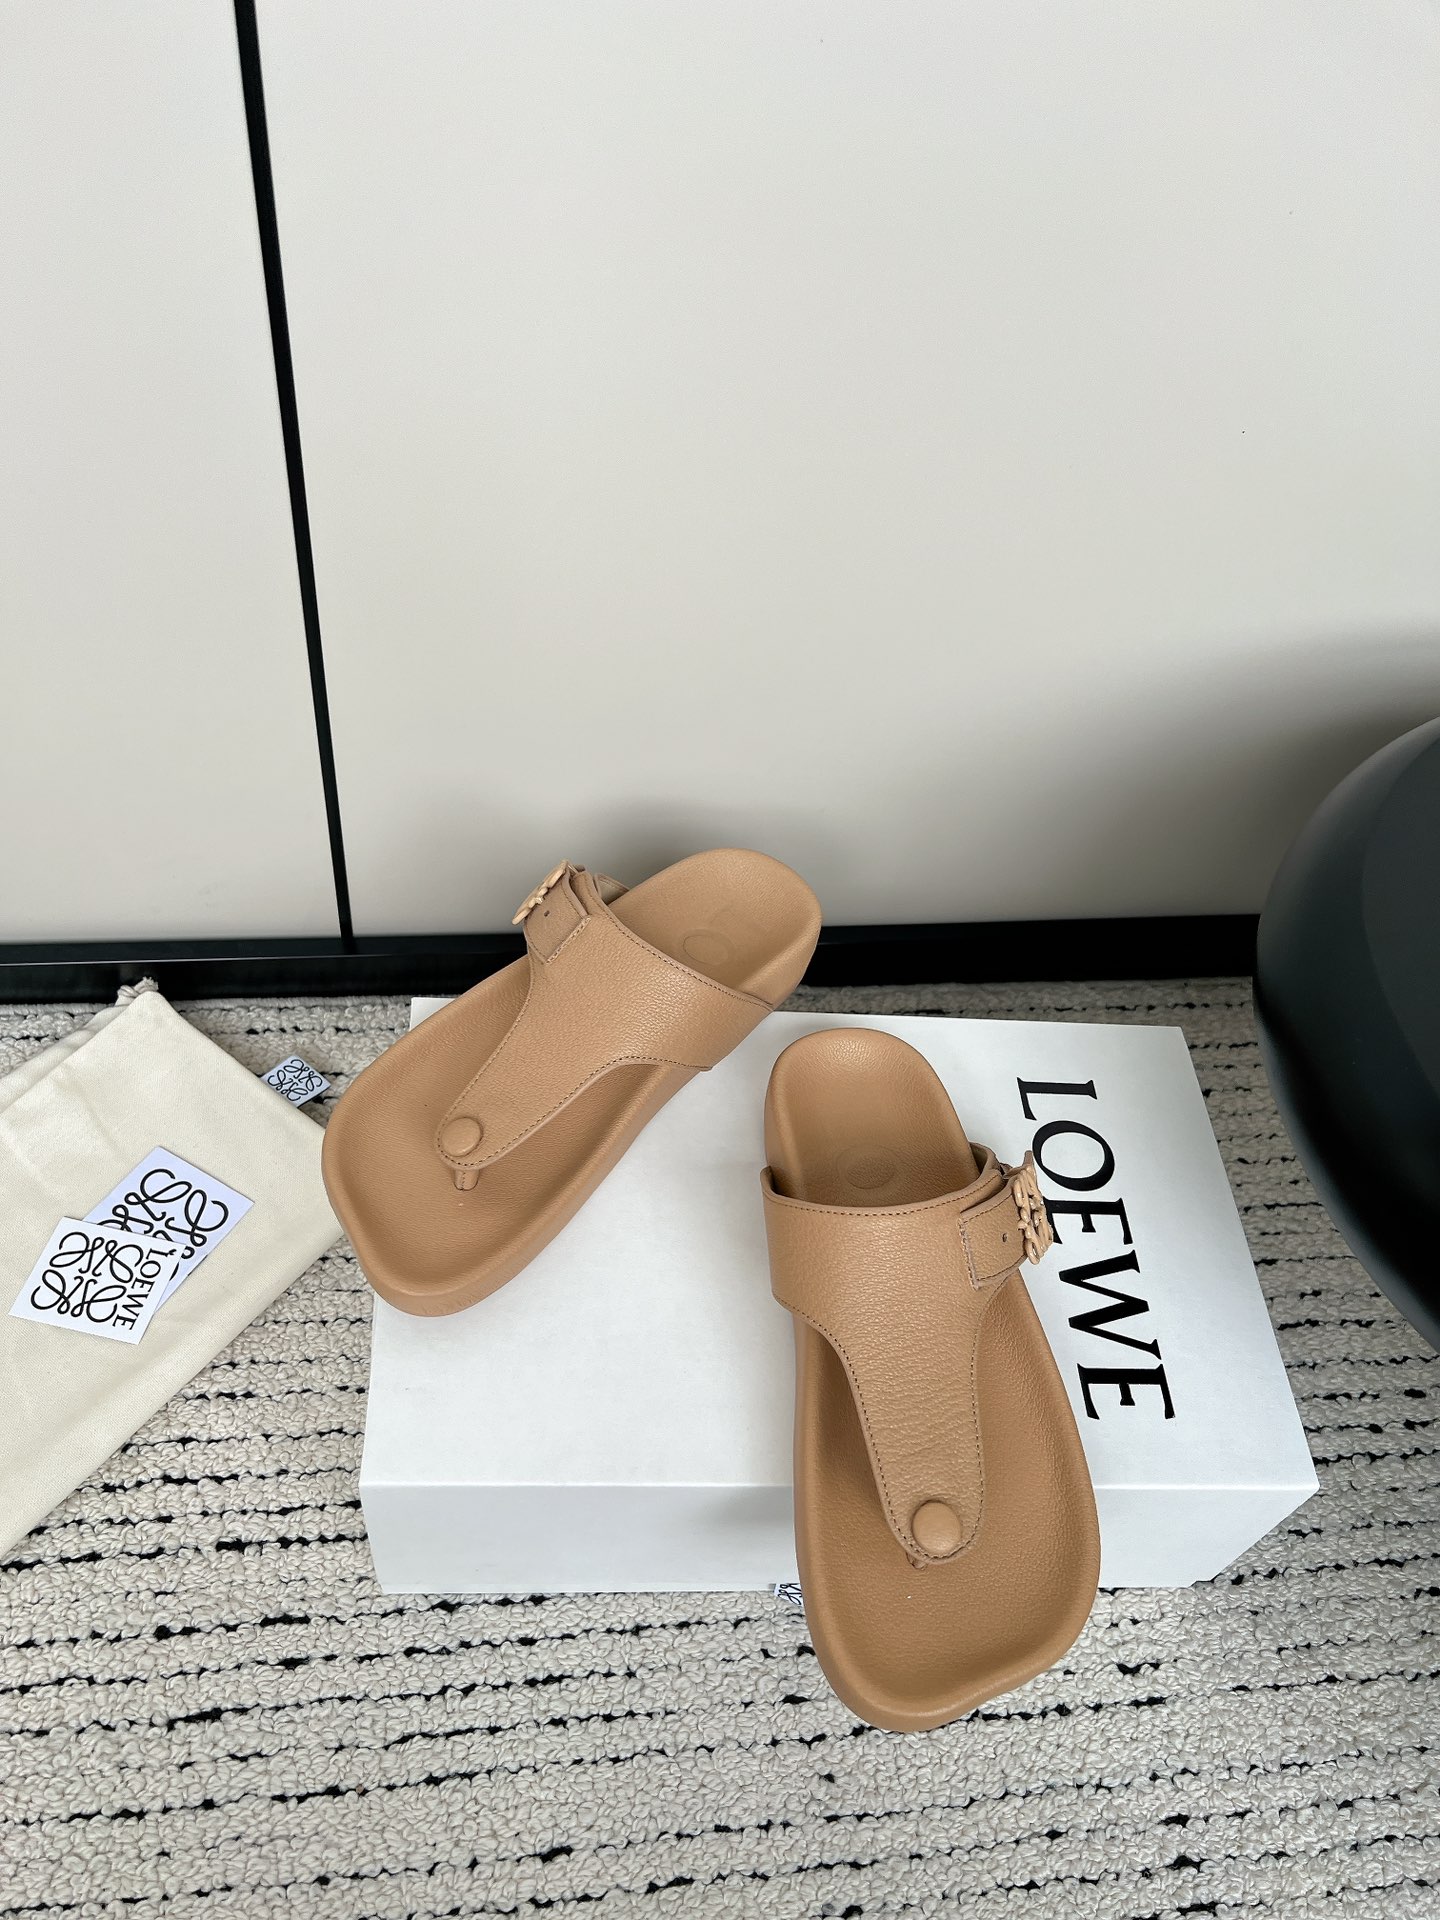 Loewe Shoes Sandals Slippers Cowhide PU Sheepskin Spring/Summer Collection Beach